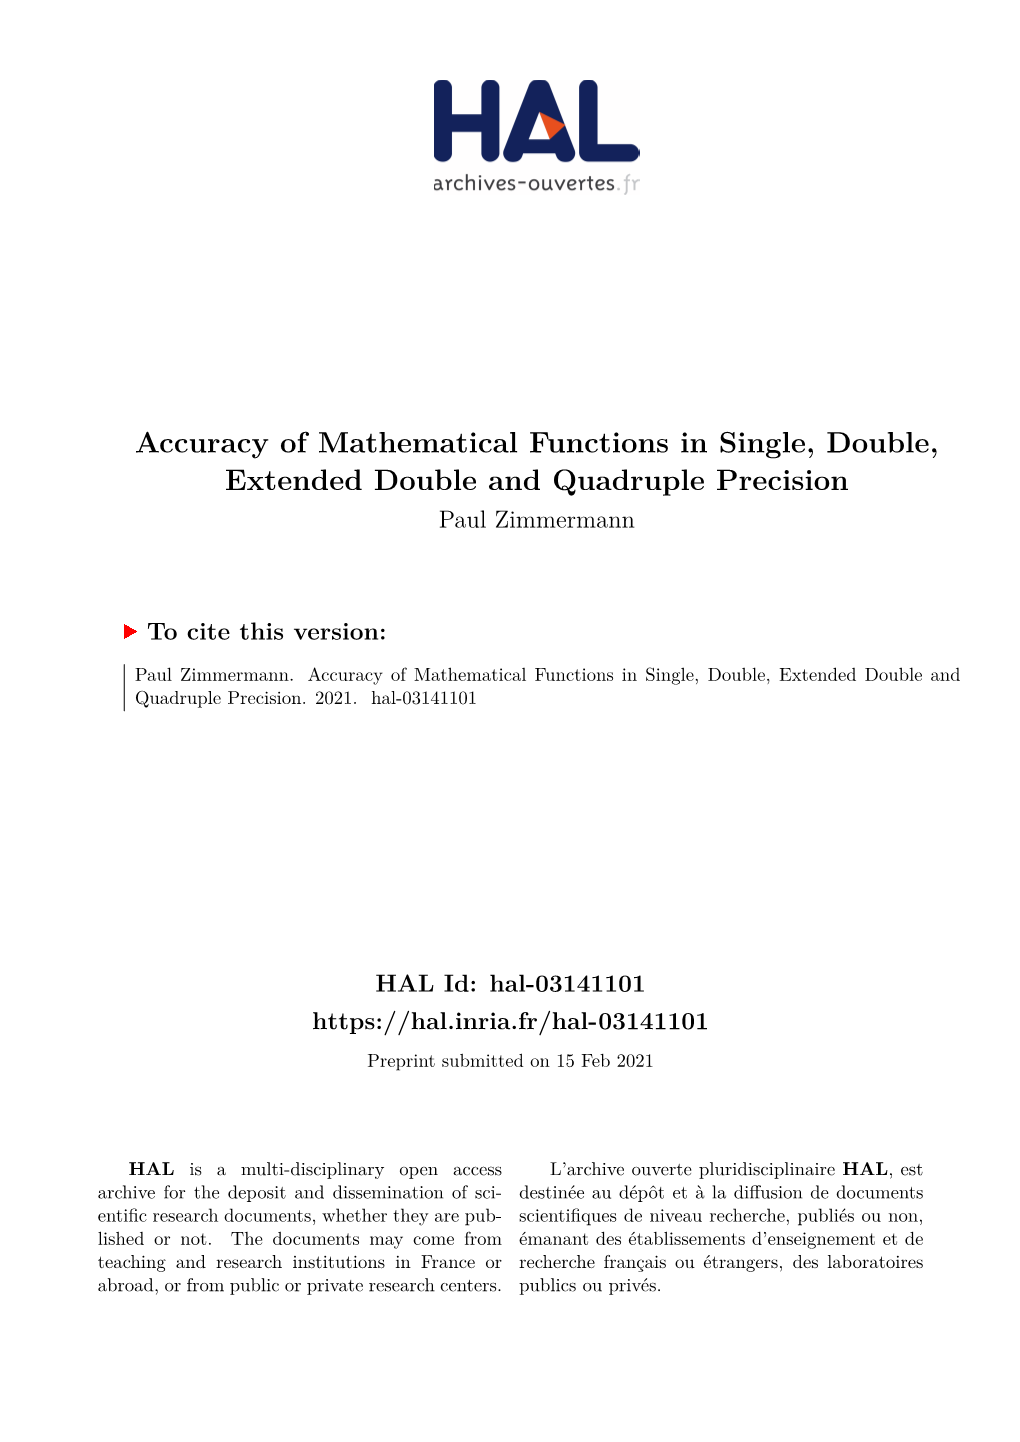 Accuracy of Mathematical Functions in Single, Double, Extended Double and Quadruple Precision Paul Zimmermann